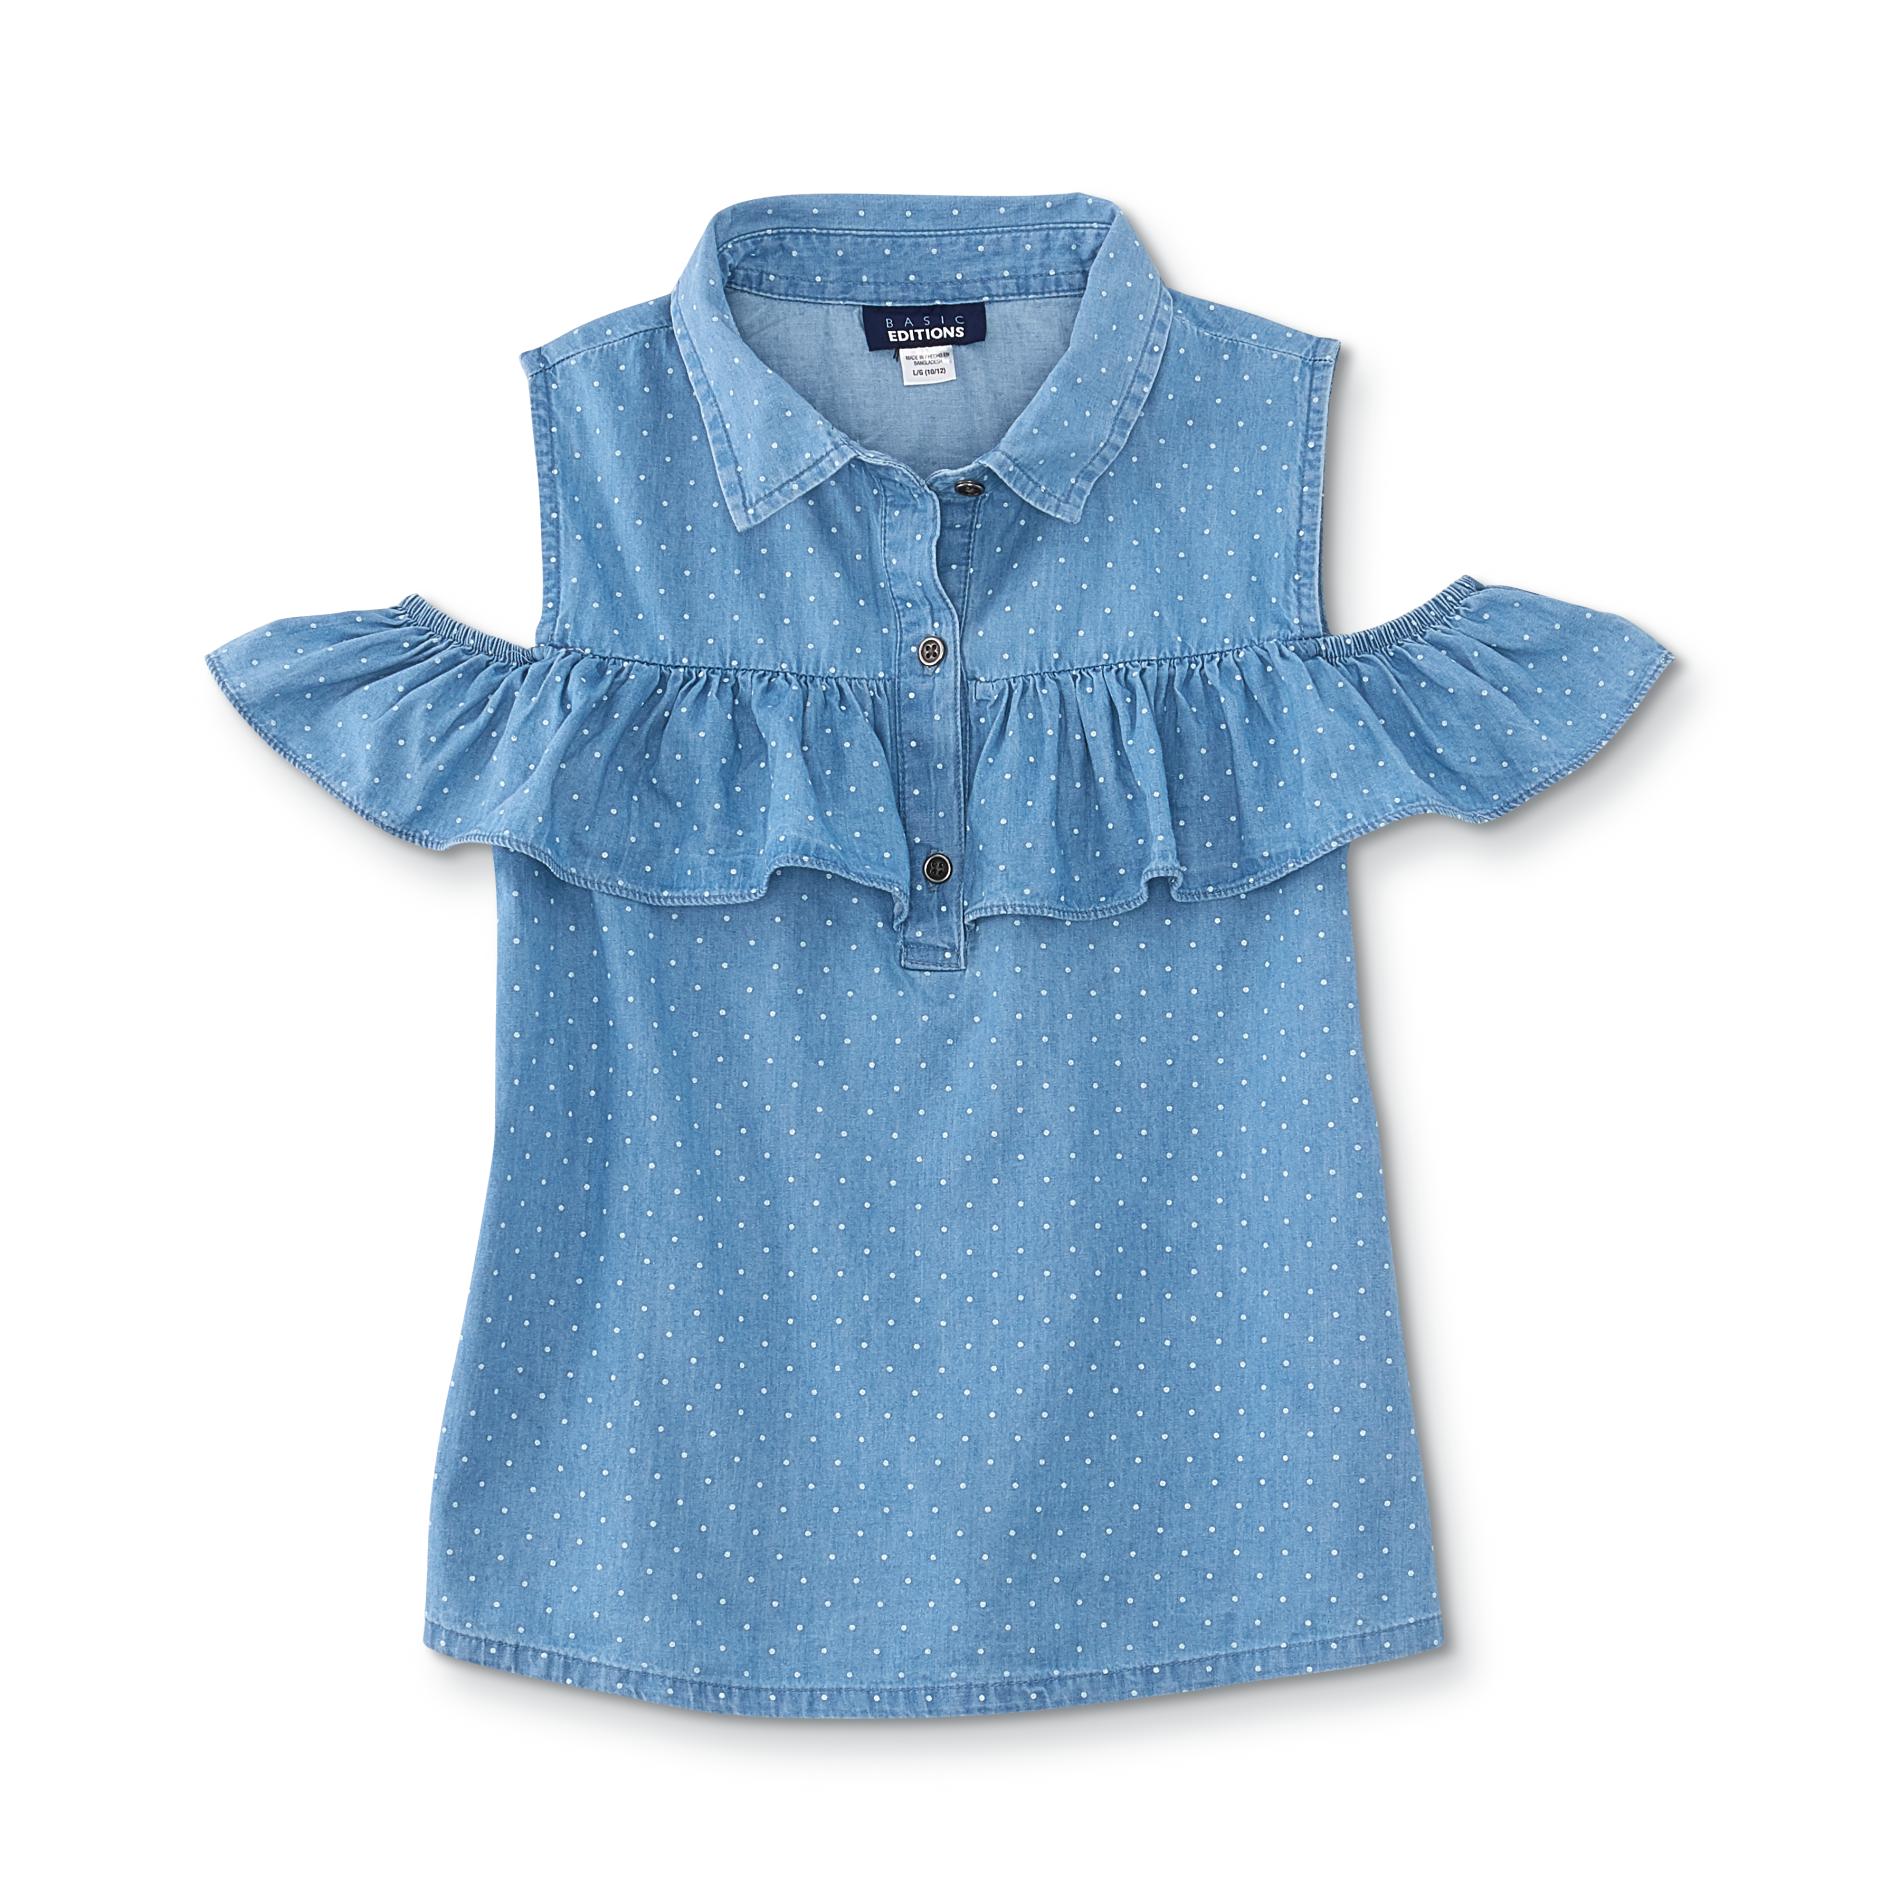 Basic Editions Girls' Cold-Shoulder Top - Dots